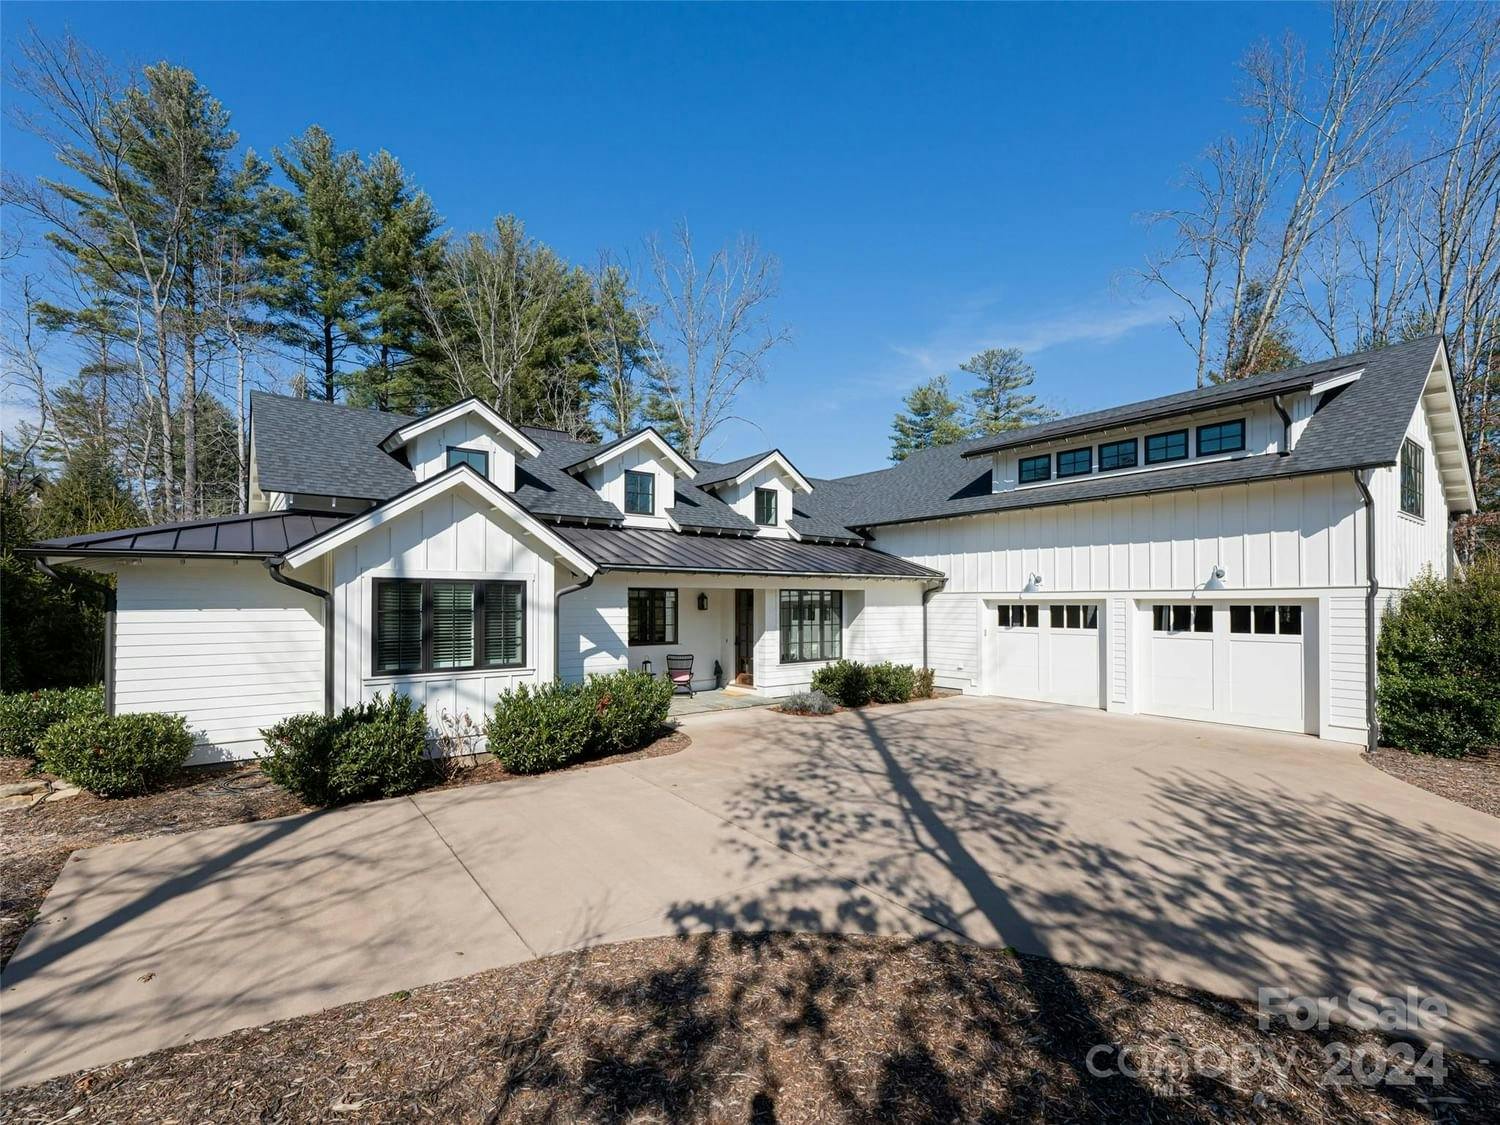 19 Brookline Drive | The Ramble at Biltmore Forest